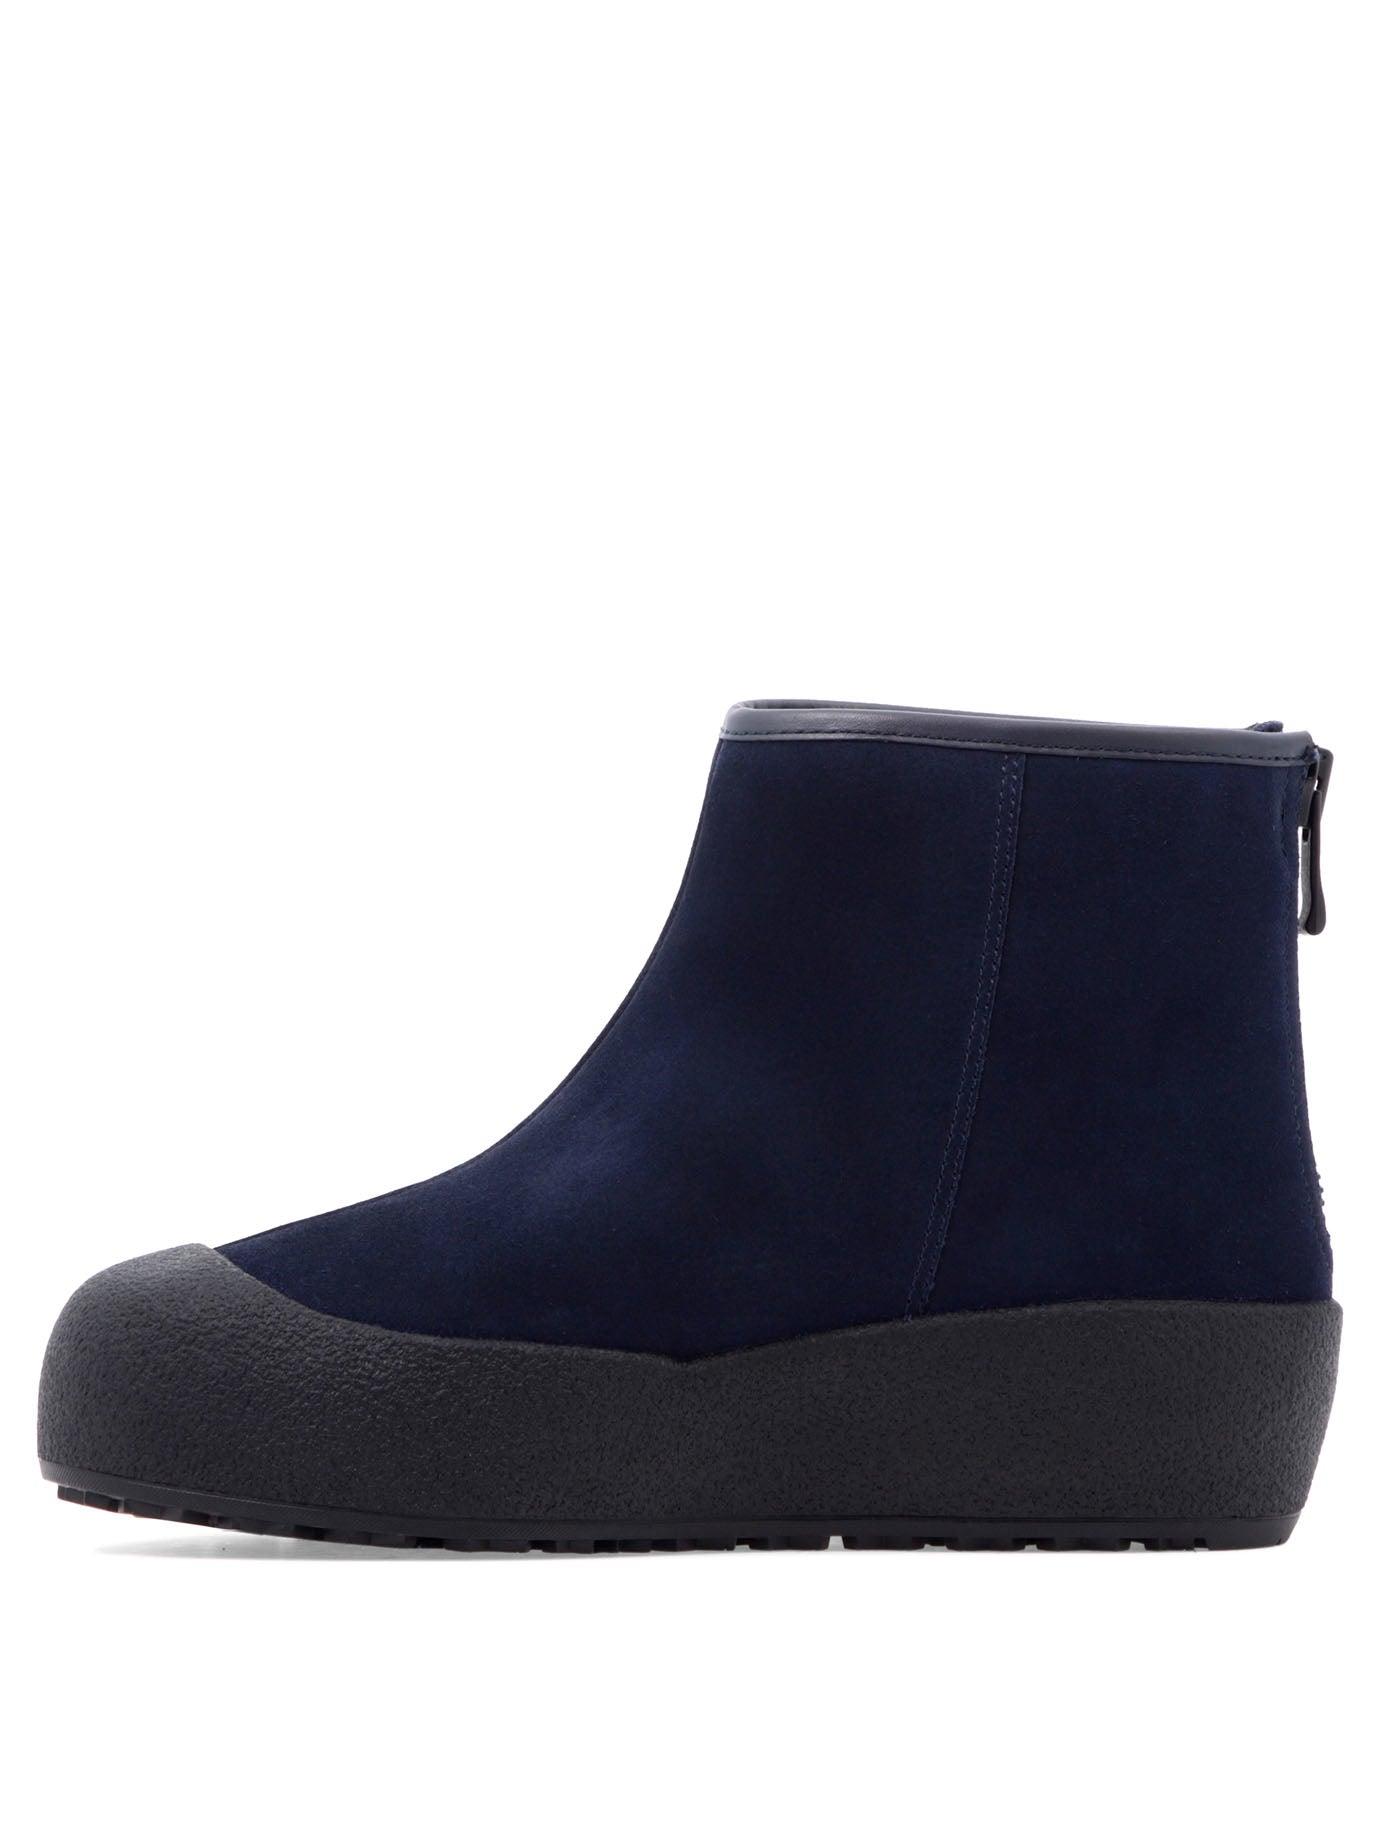 Bally Guard Ii Ankle Boots in Blue | Lyst